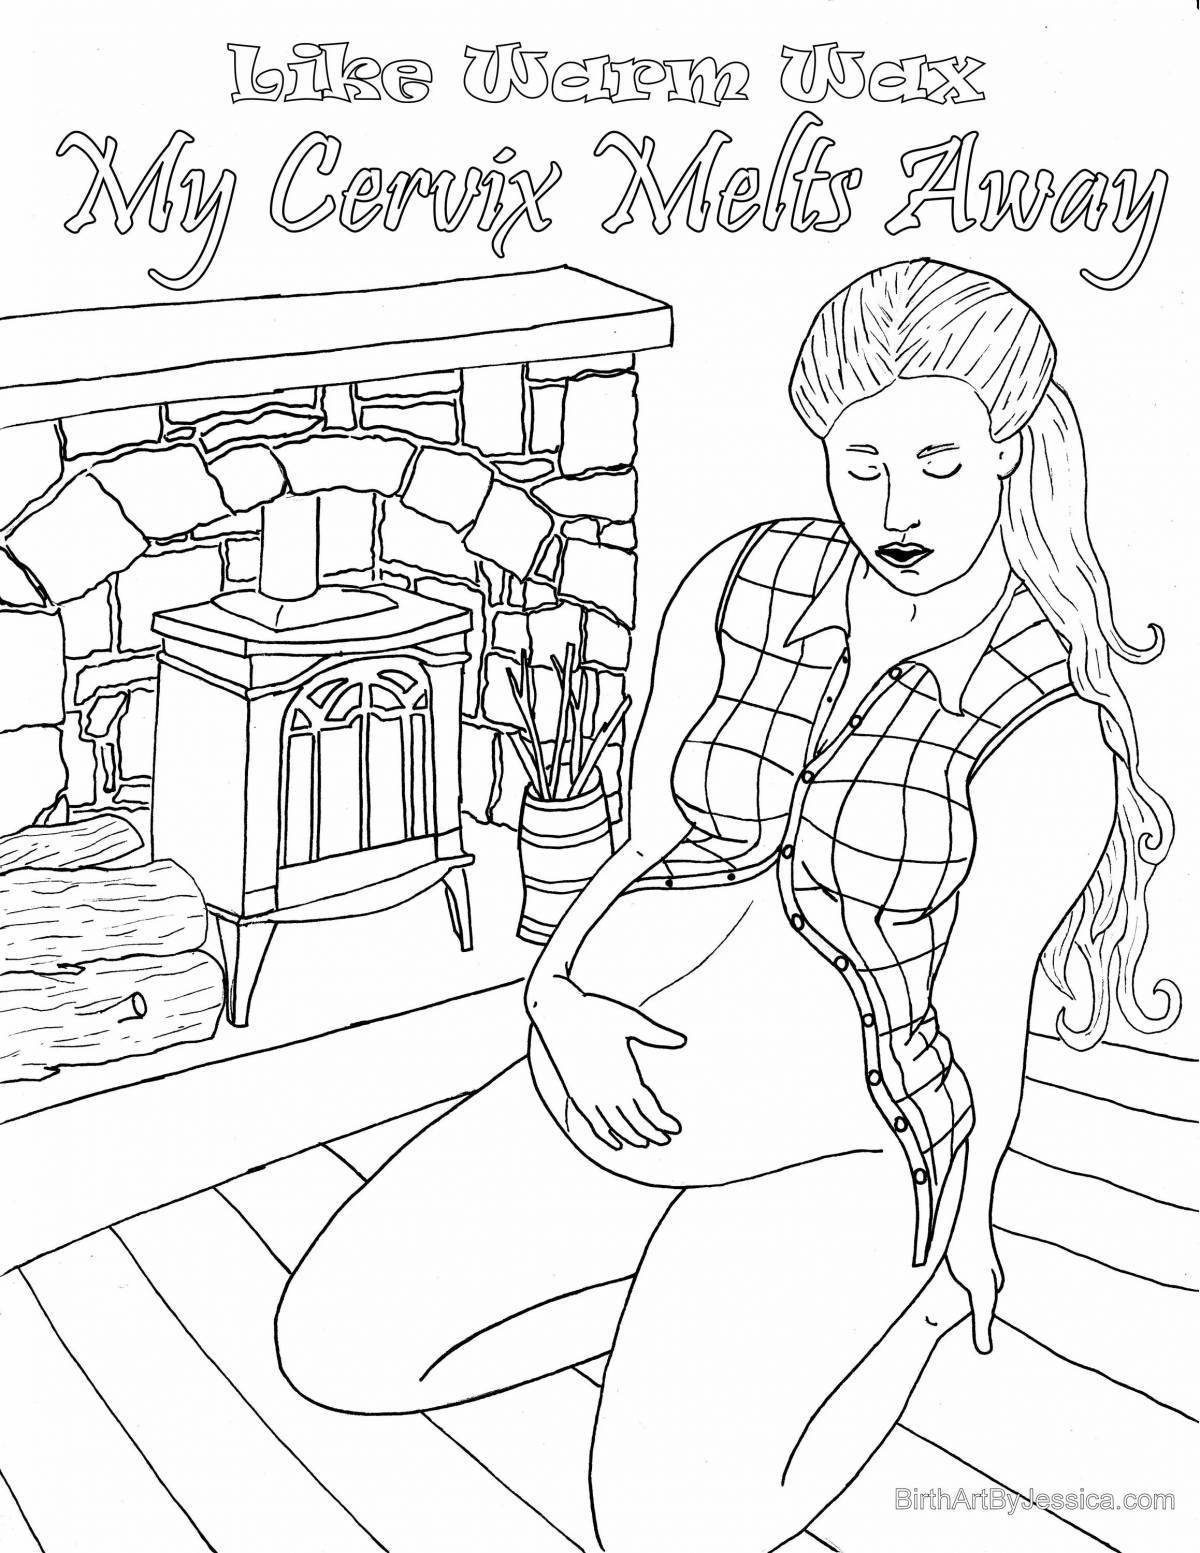 Amazing pregnancy coloring page